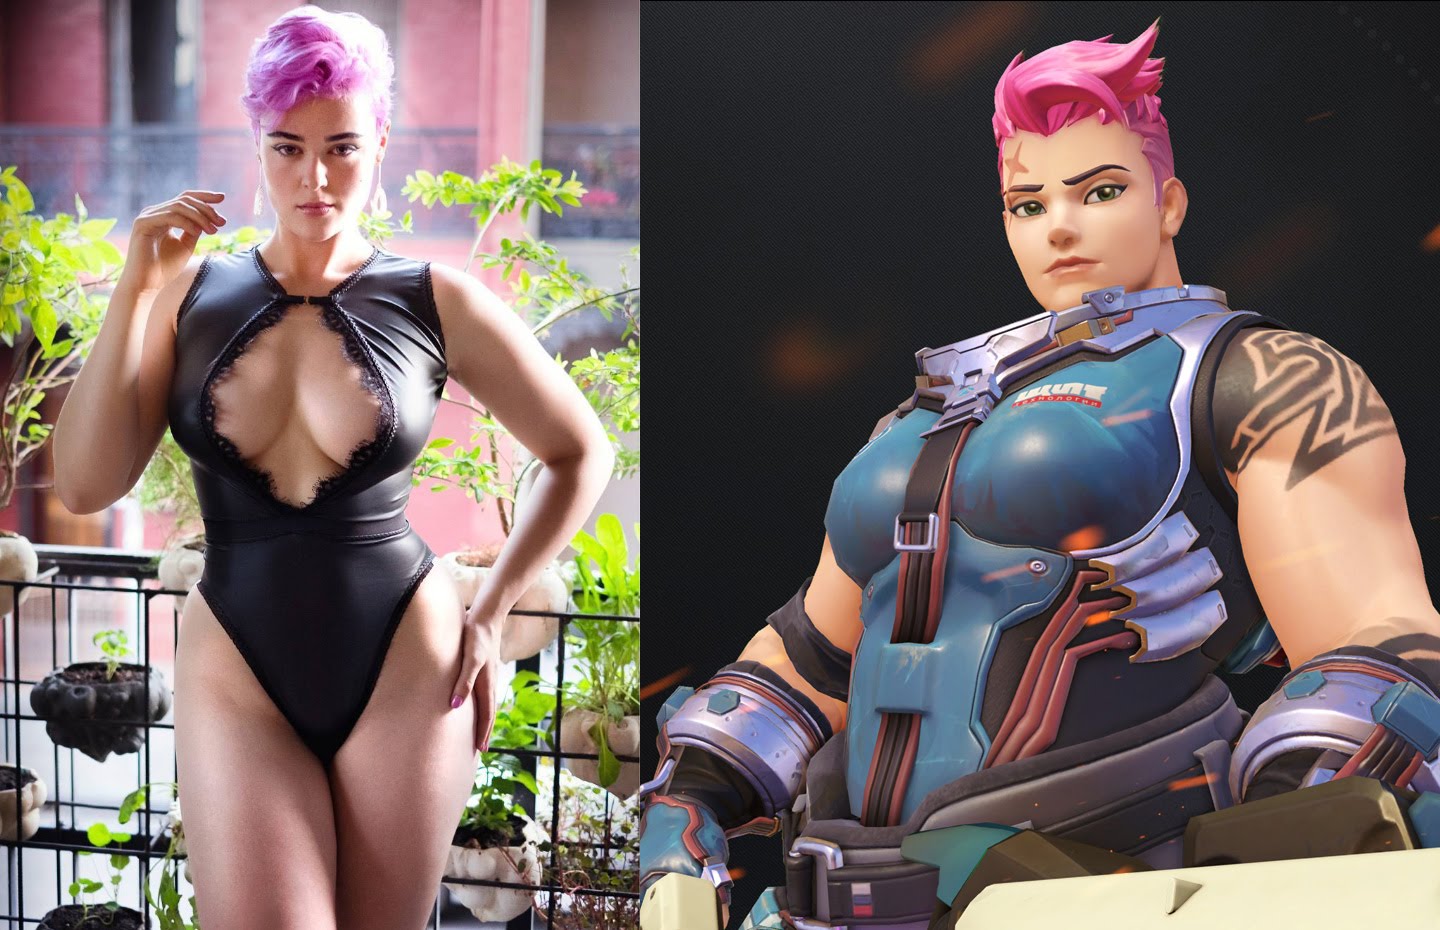 Zarya cosplay that is looking much better than the orginal